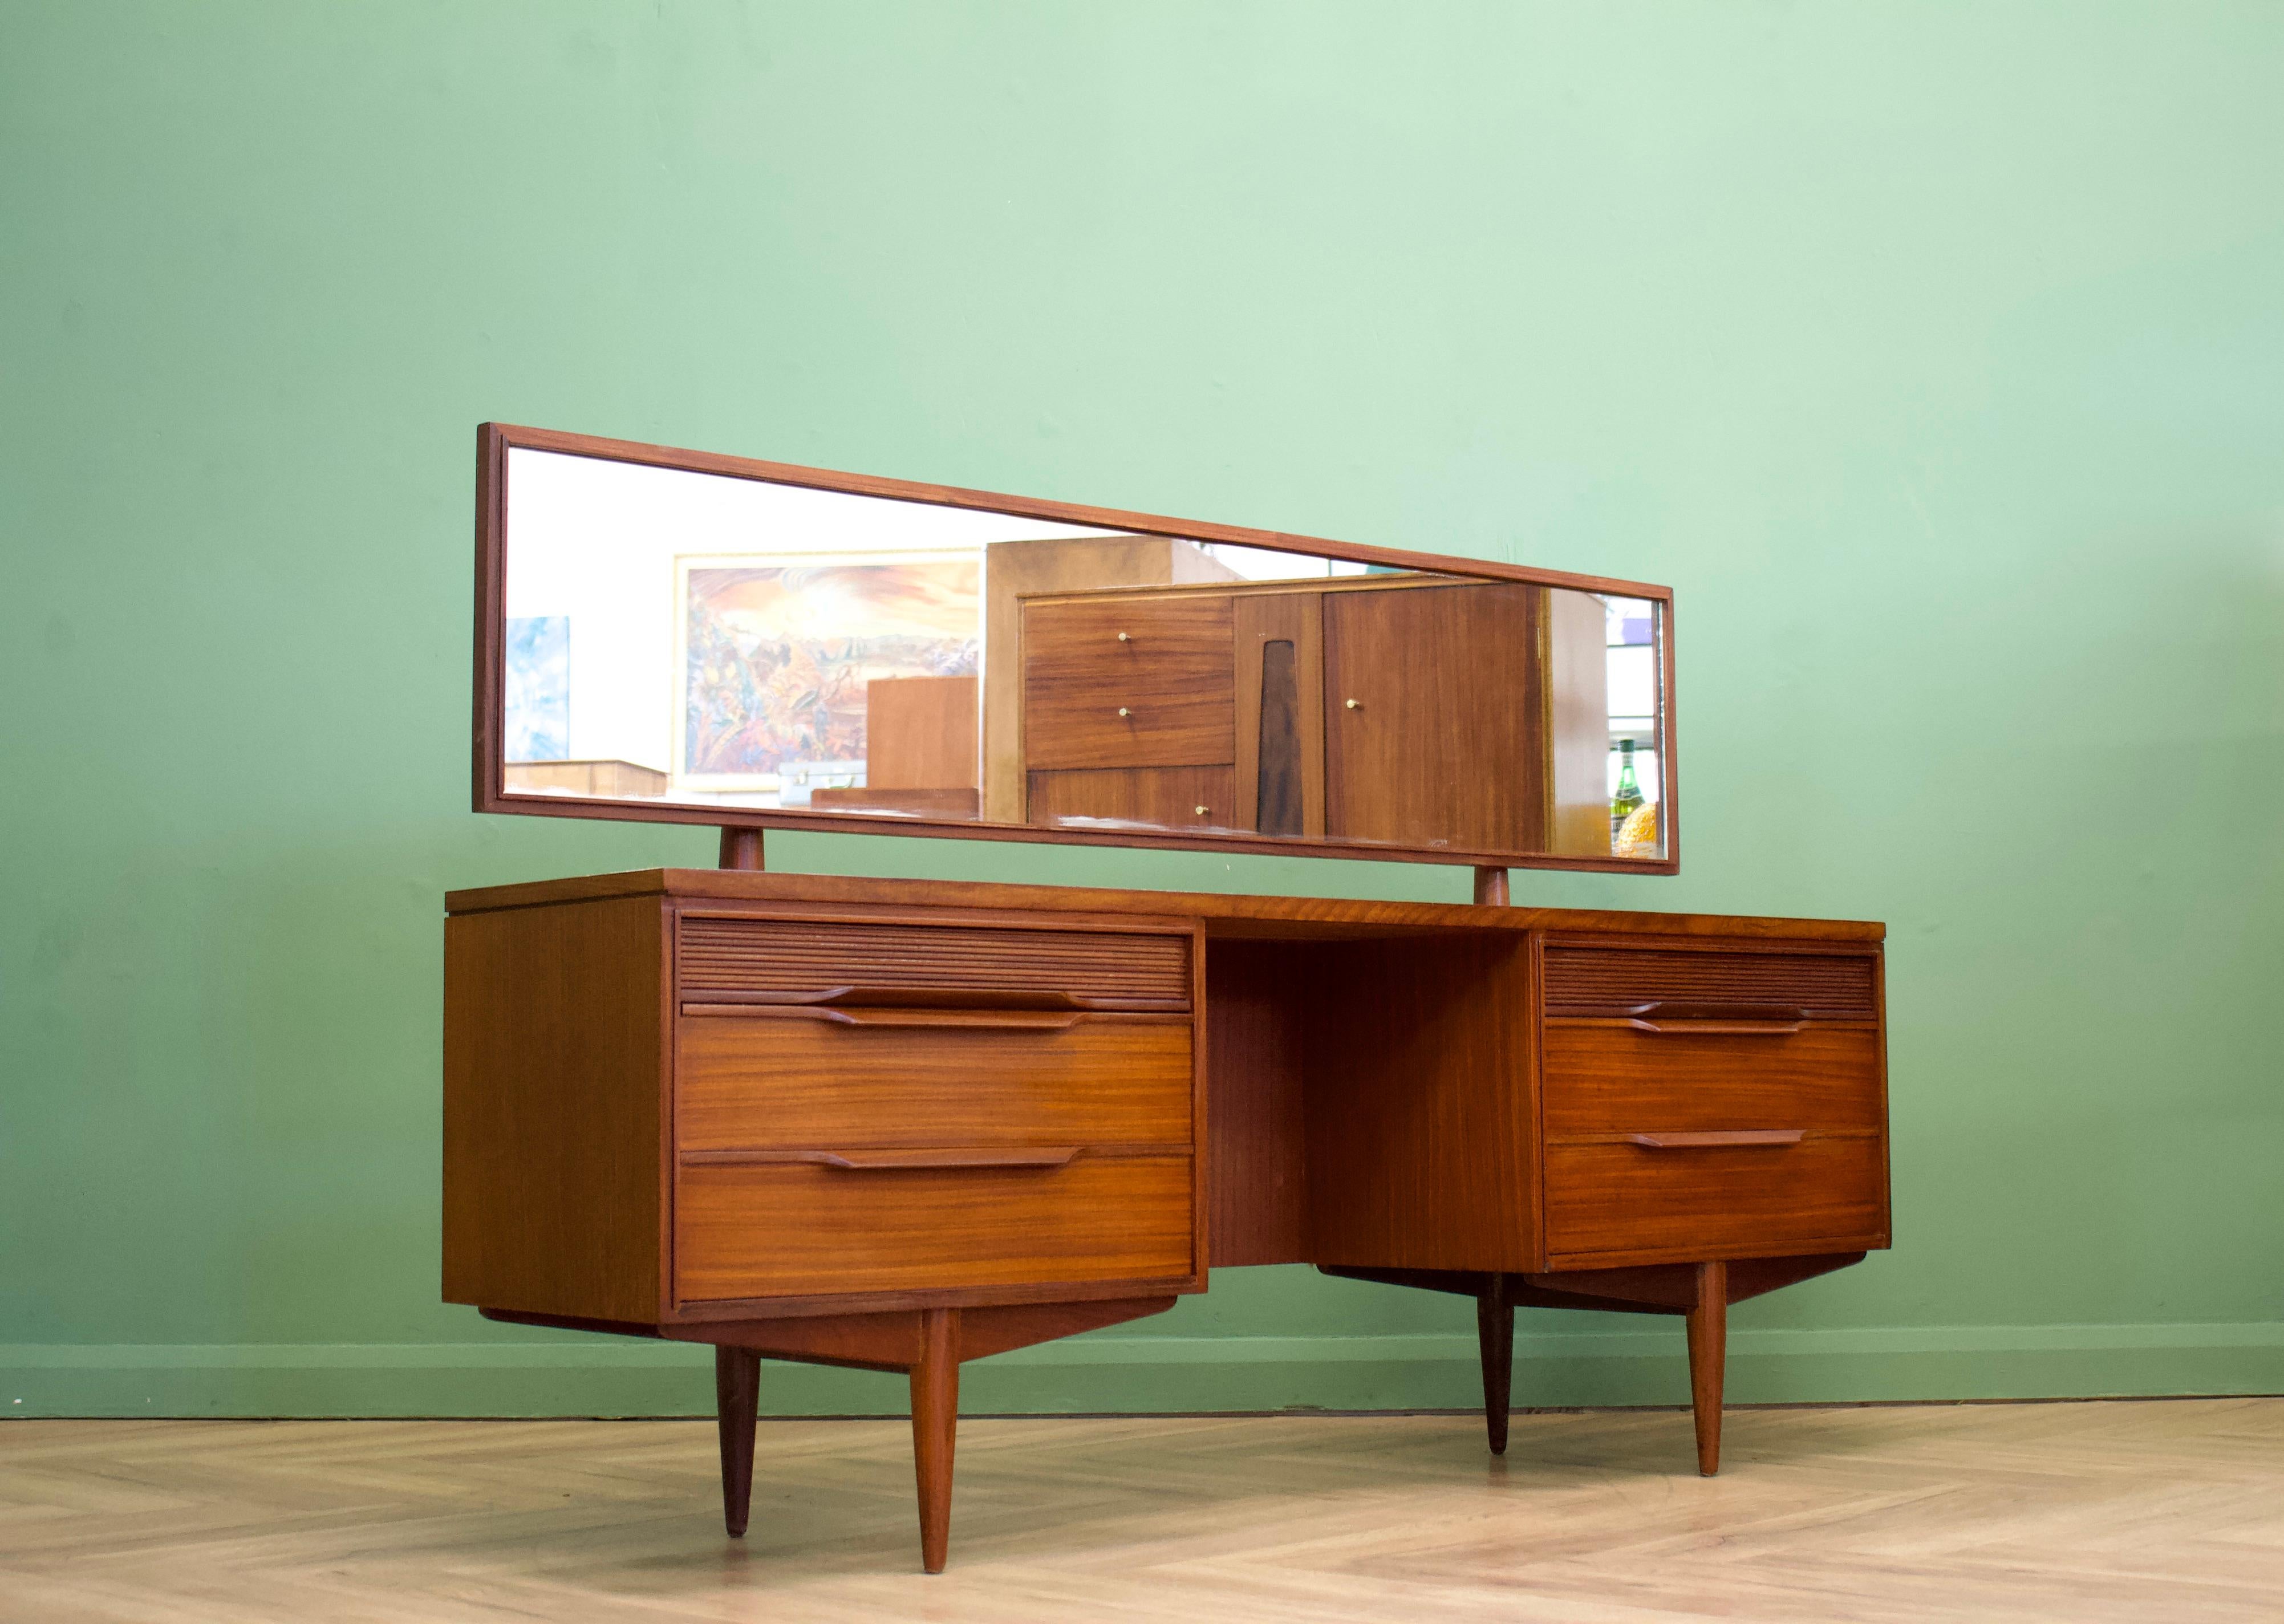 - Midcentury dressing table.
- Made in the UK by White and Newton
- Featuring six drawers and mirror

.